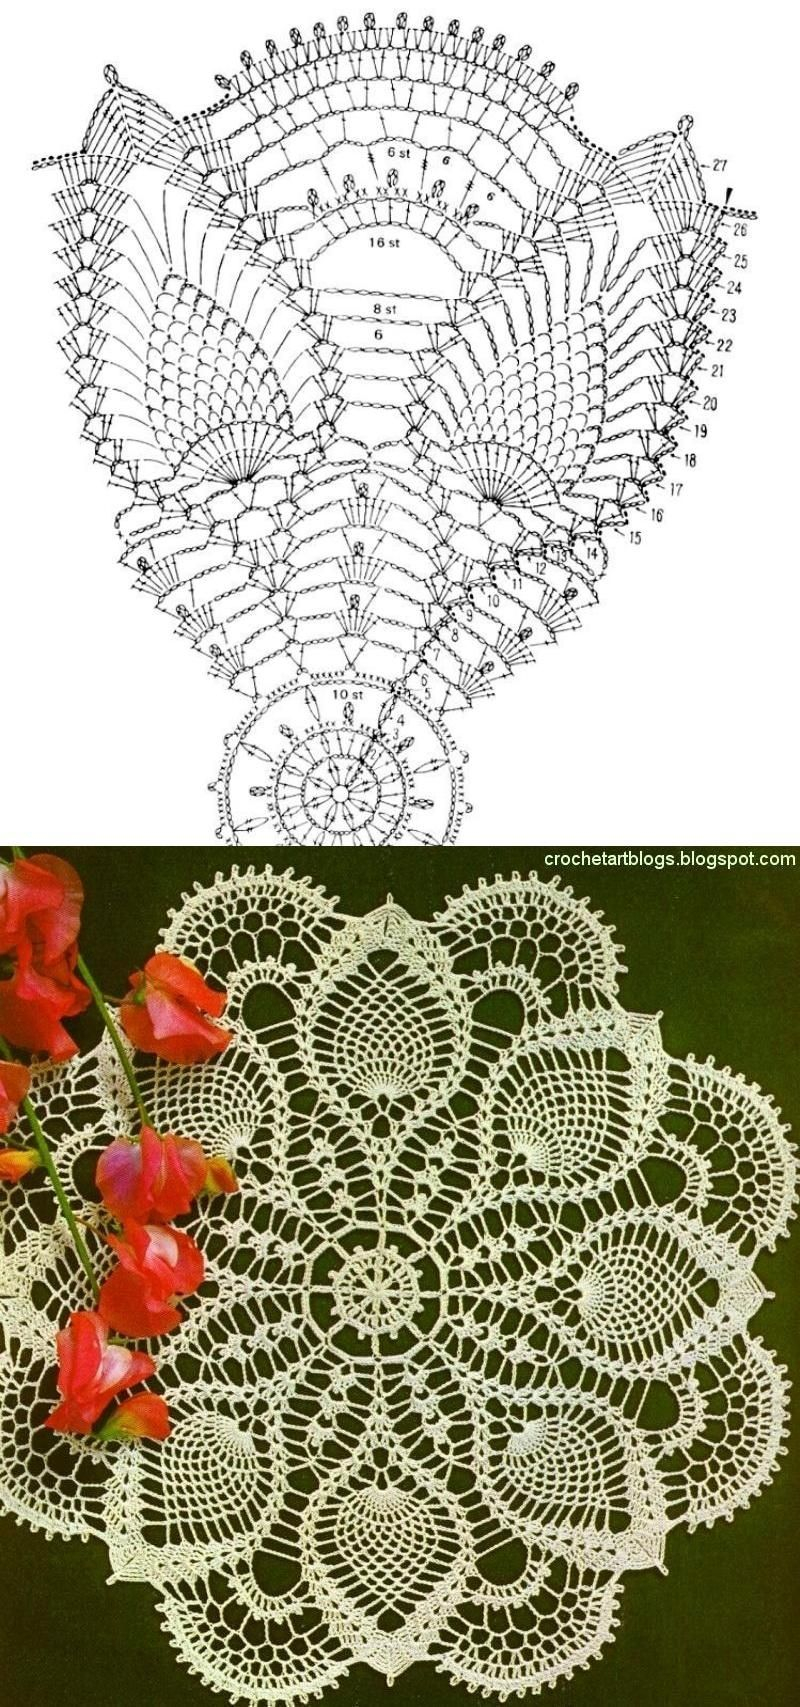 Crochet Doily Patterns Free Diagrams Lots Of Free Crochet Doily Patterns Here Crochet